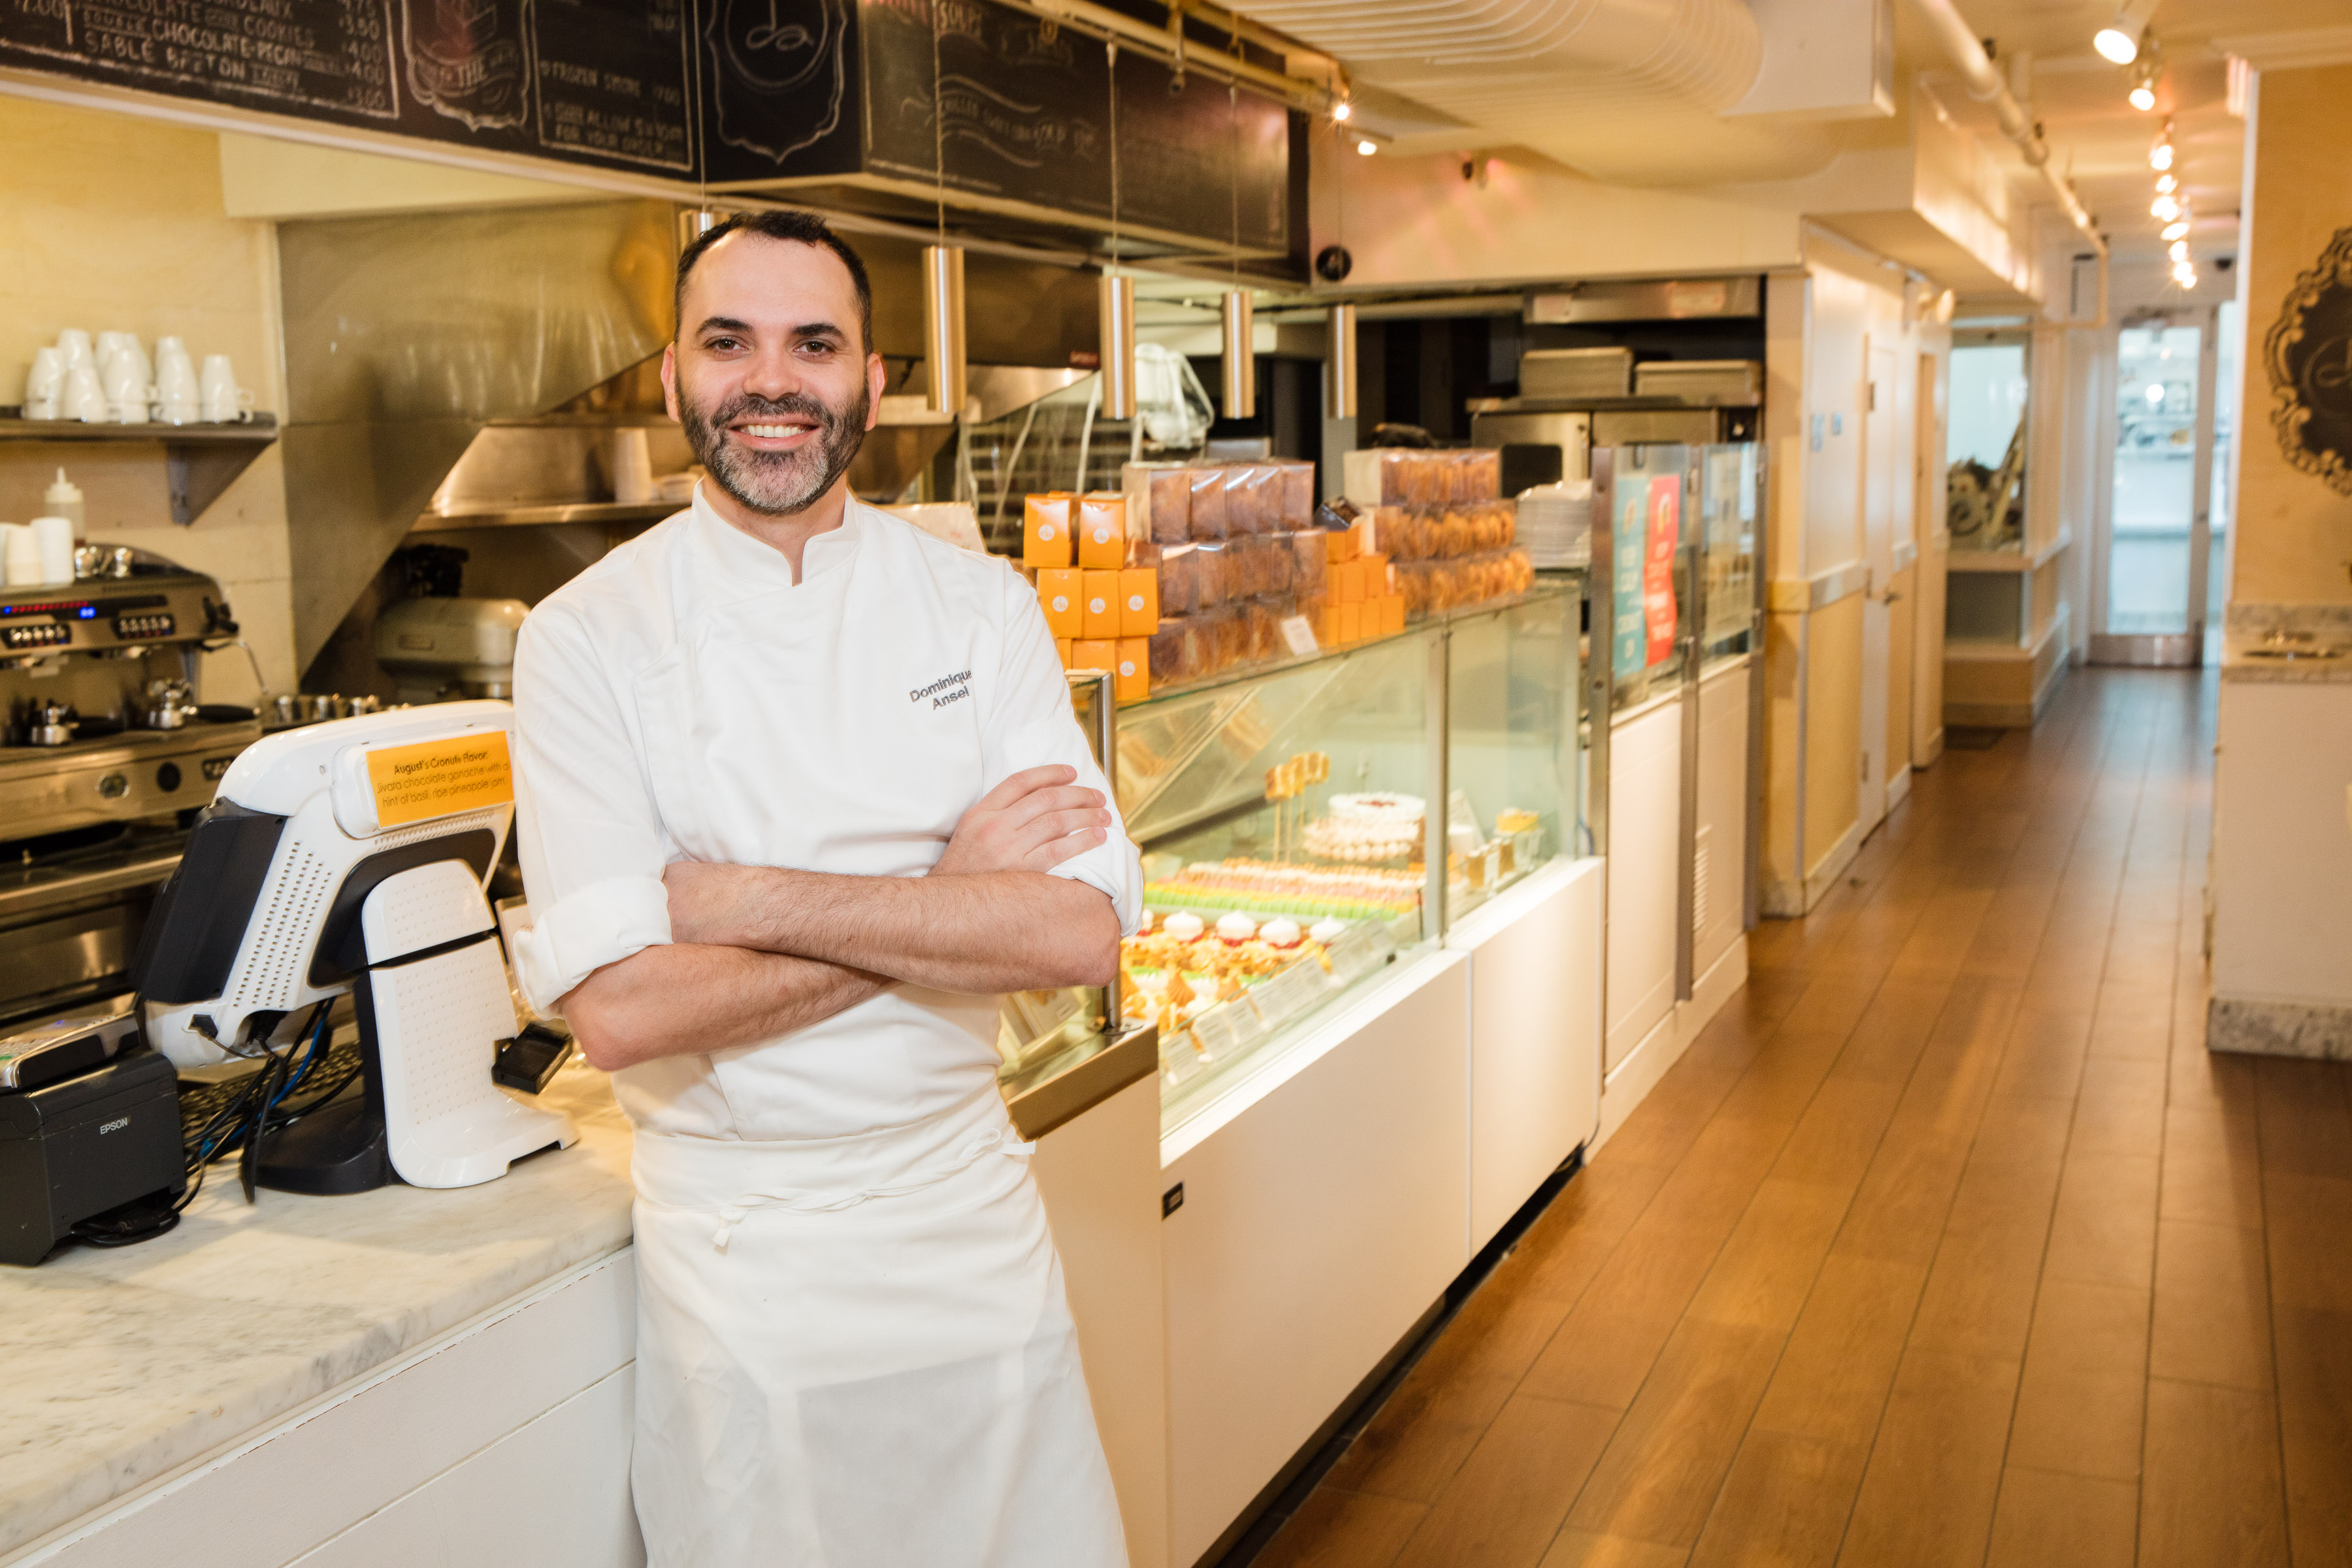 A chef stands with his arms crossed in a bakery.